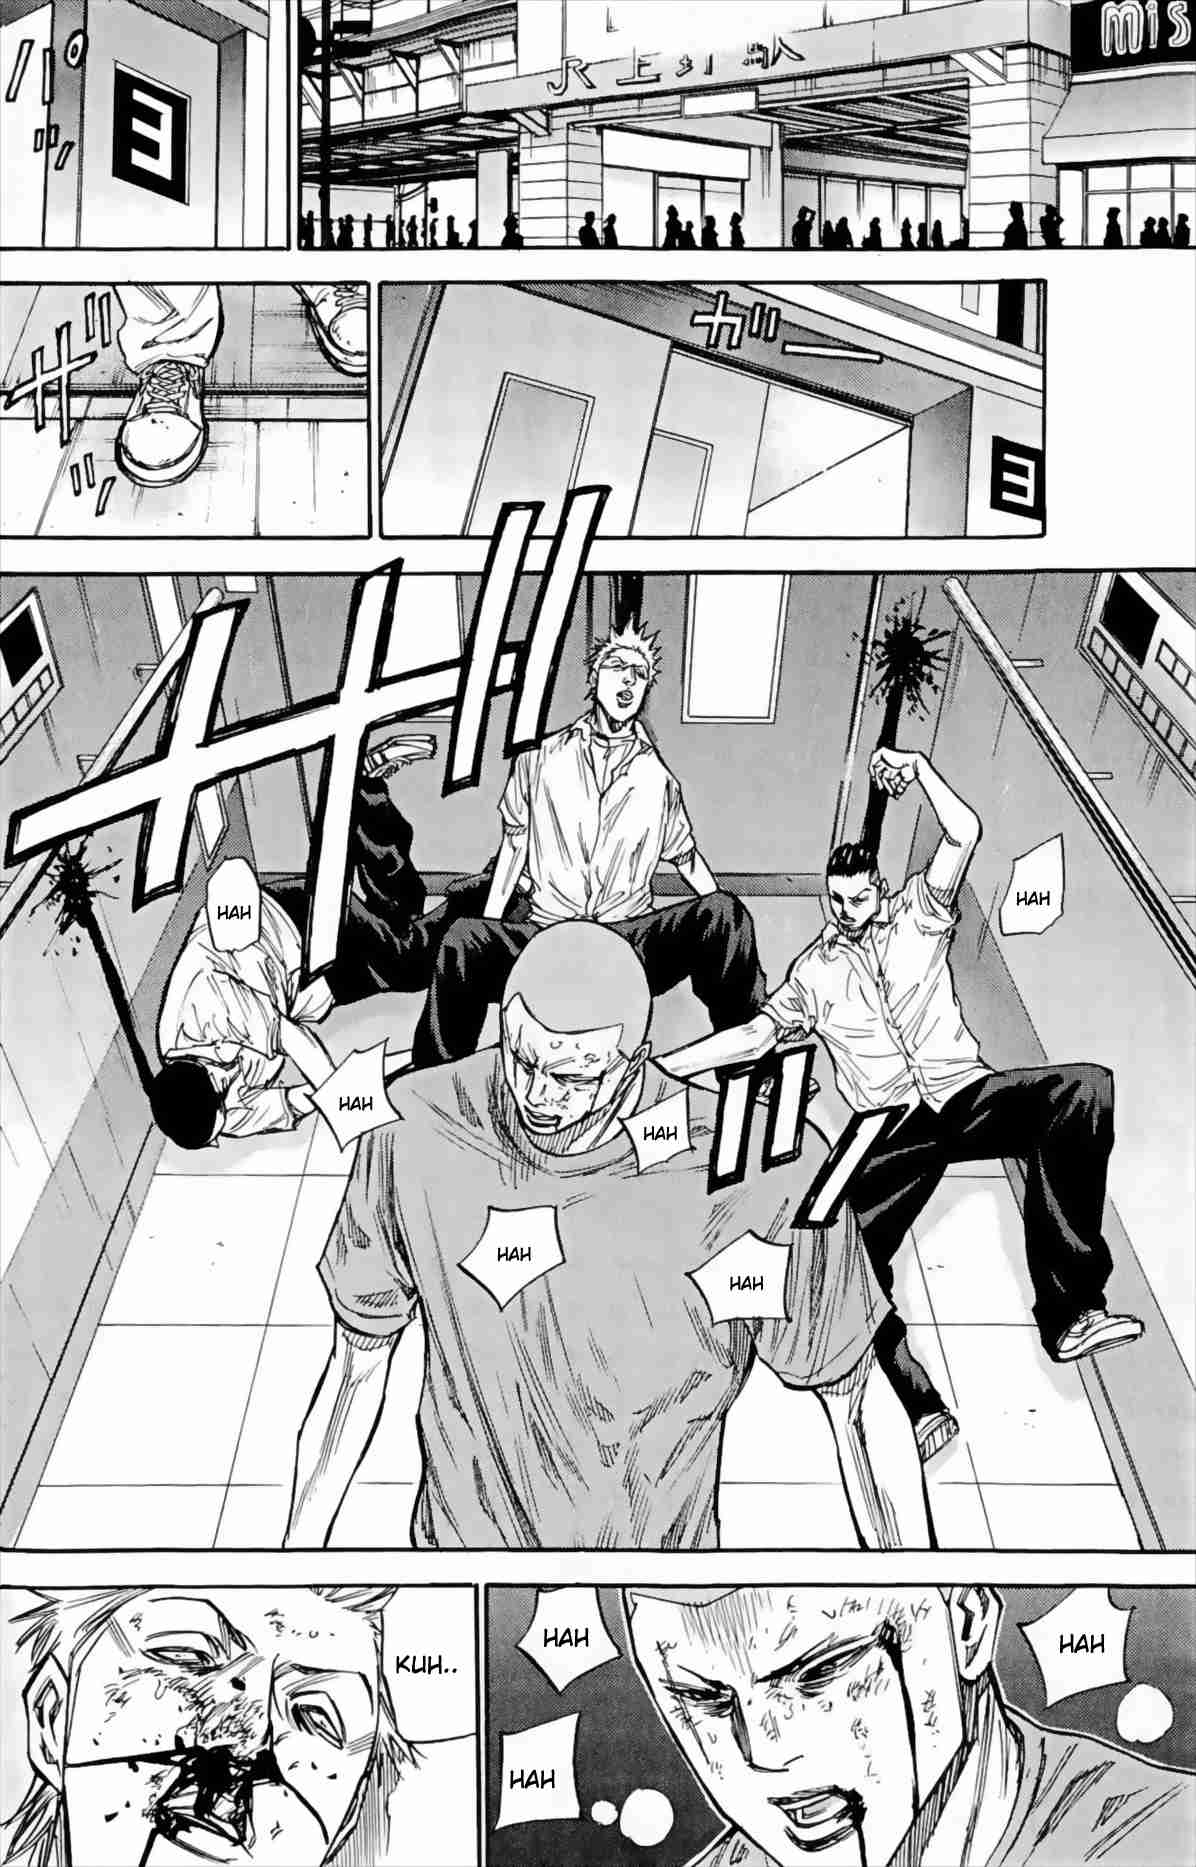 A bout! Vol. 6 Ch. 47 As expected, It's come to Nothing